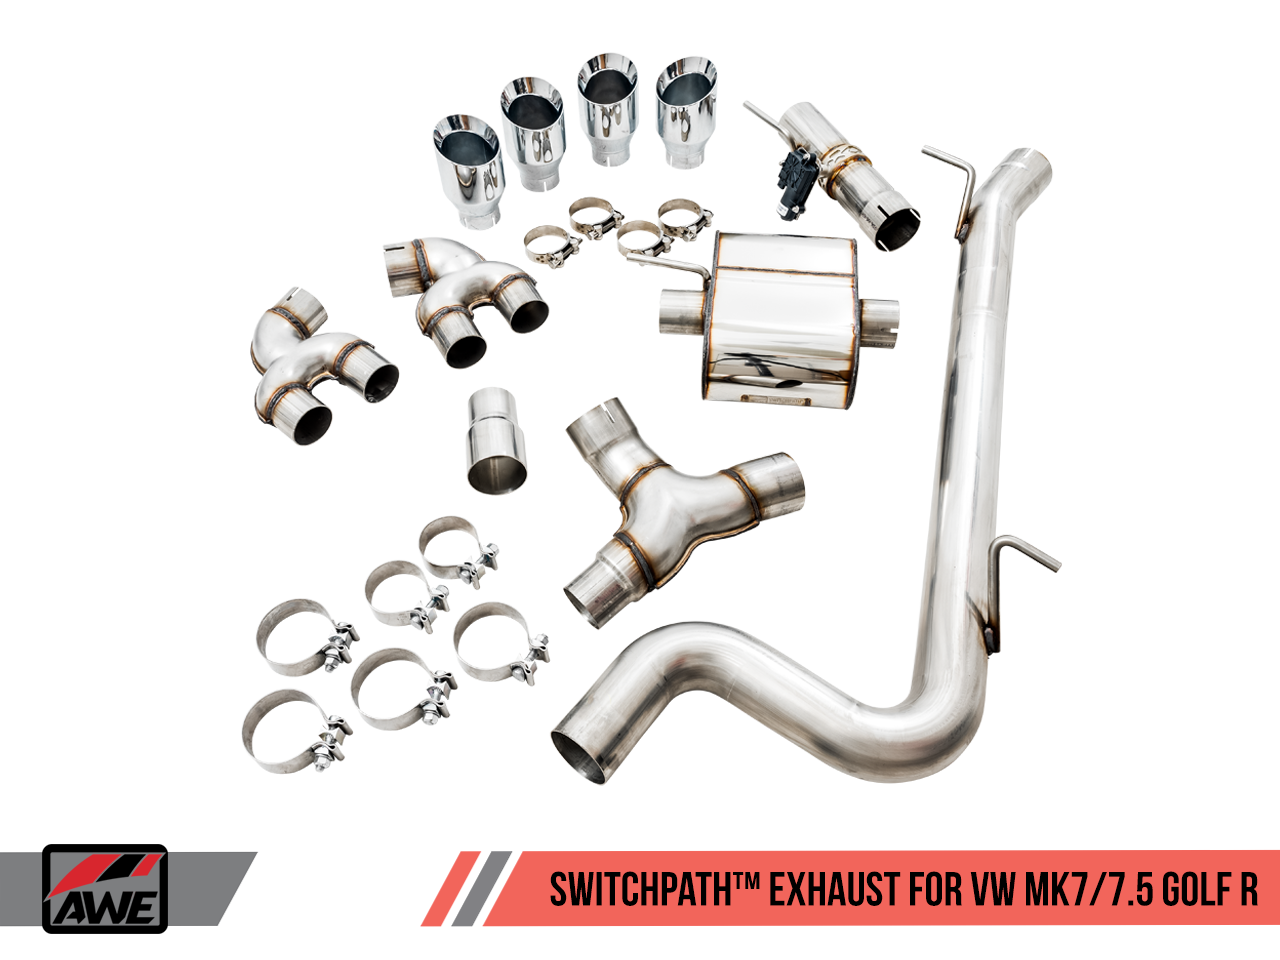 AWE Track Edition Exhaust for MK7.5 Golf R - Motorsports LA